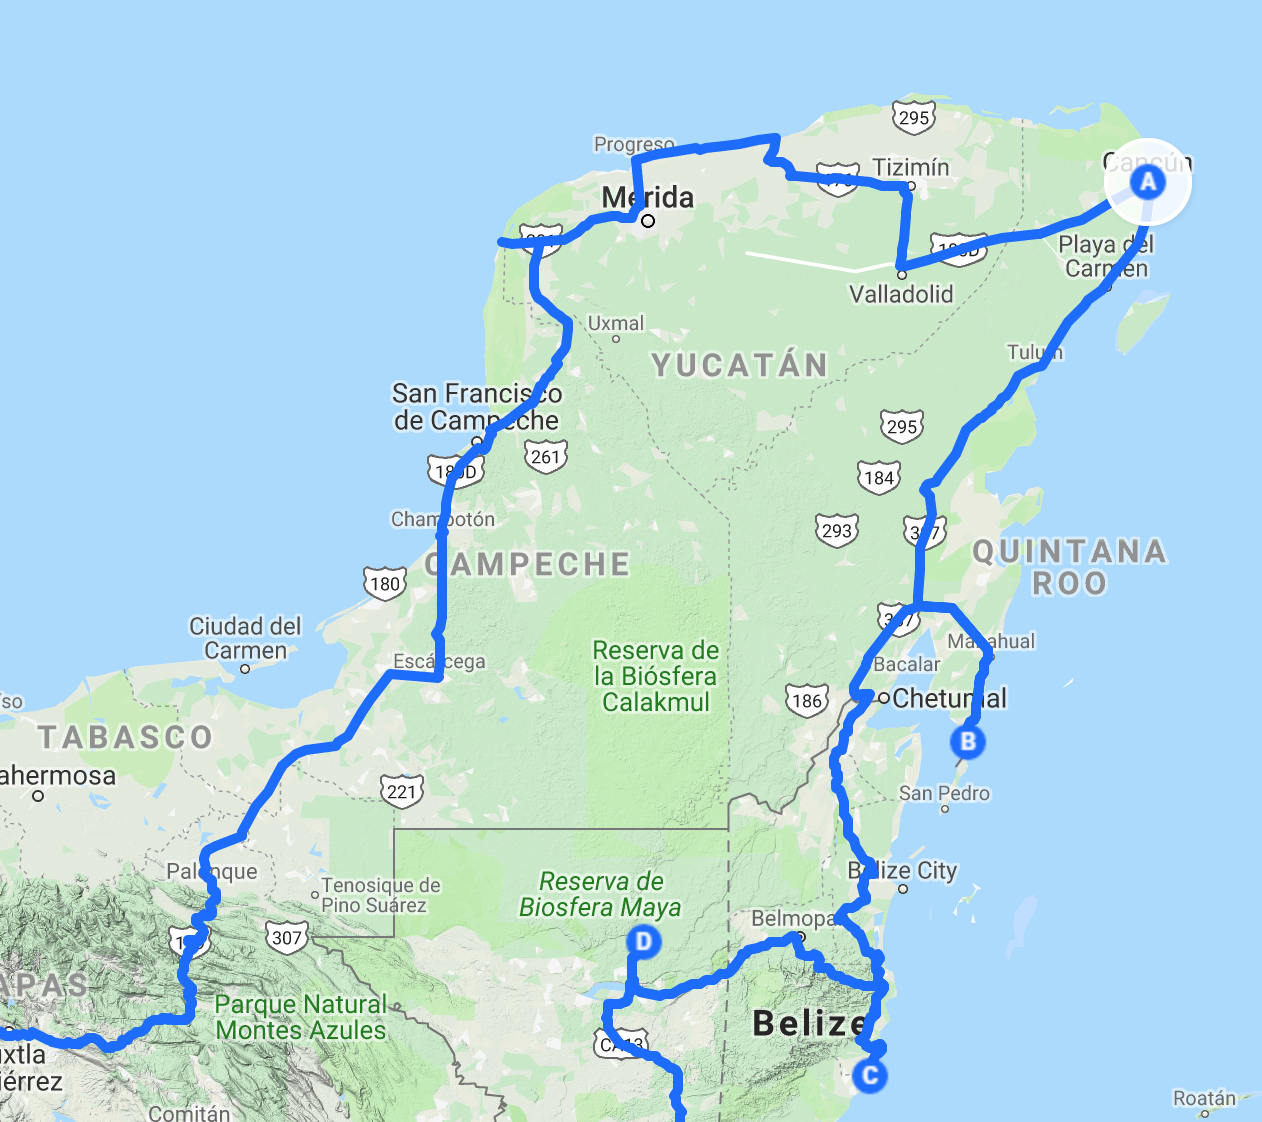 Our route in Yucatan state, Mexico